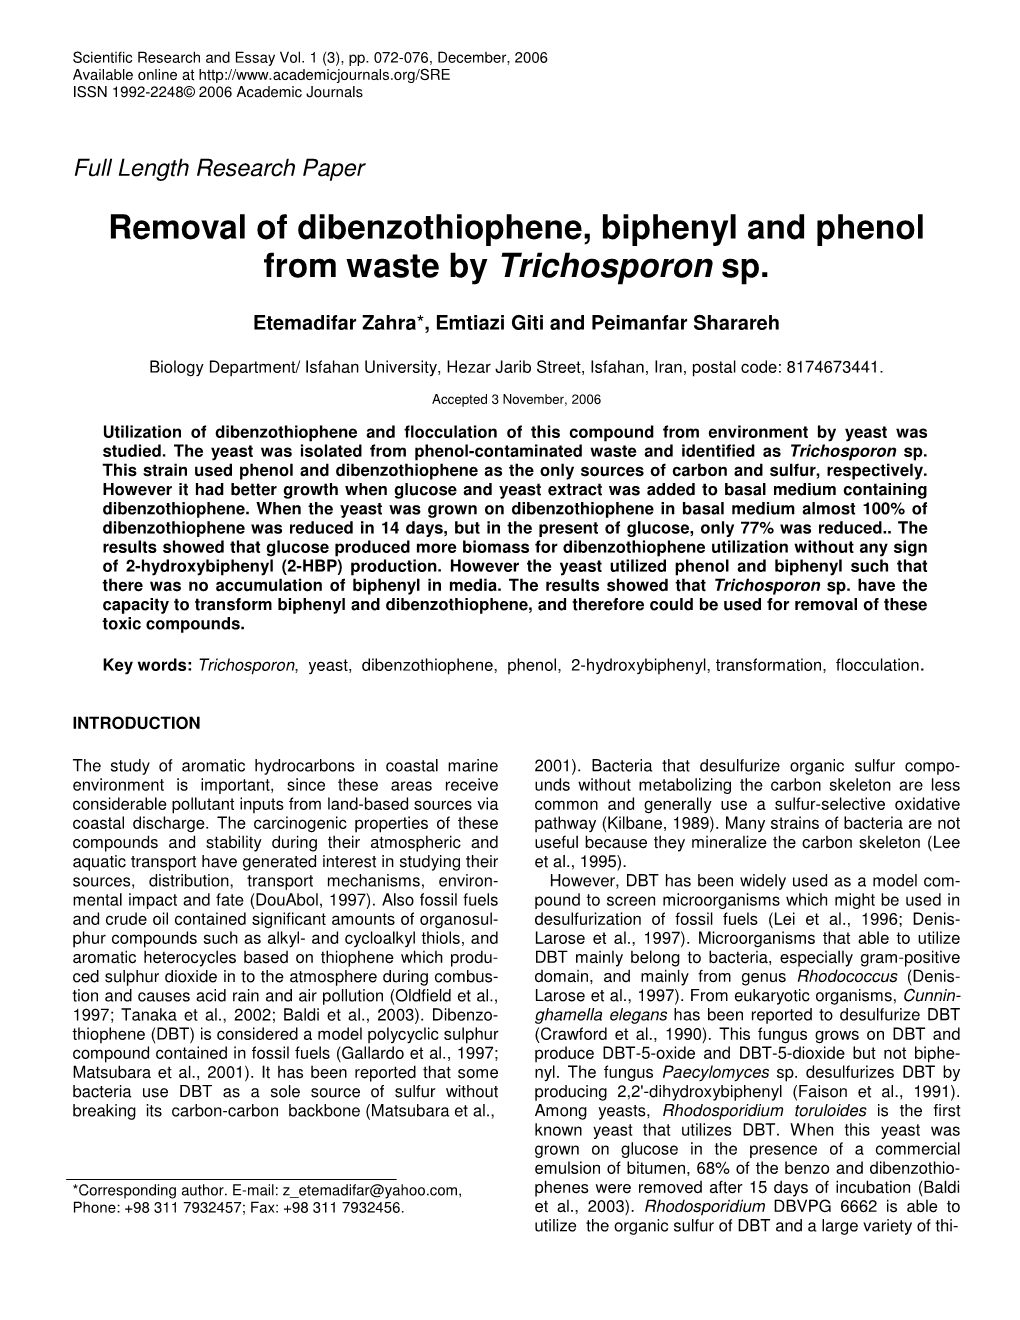 Removal of Dibenzothiophene, Biphenyl and Phenol from Waste by Trichosporon Sp